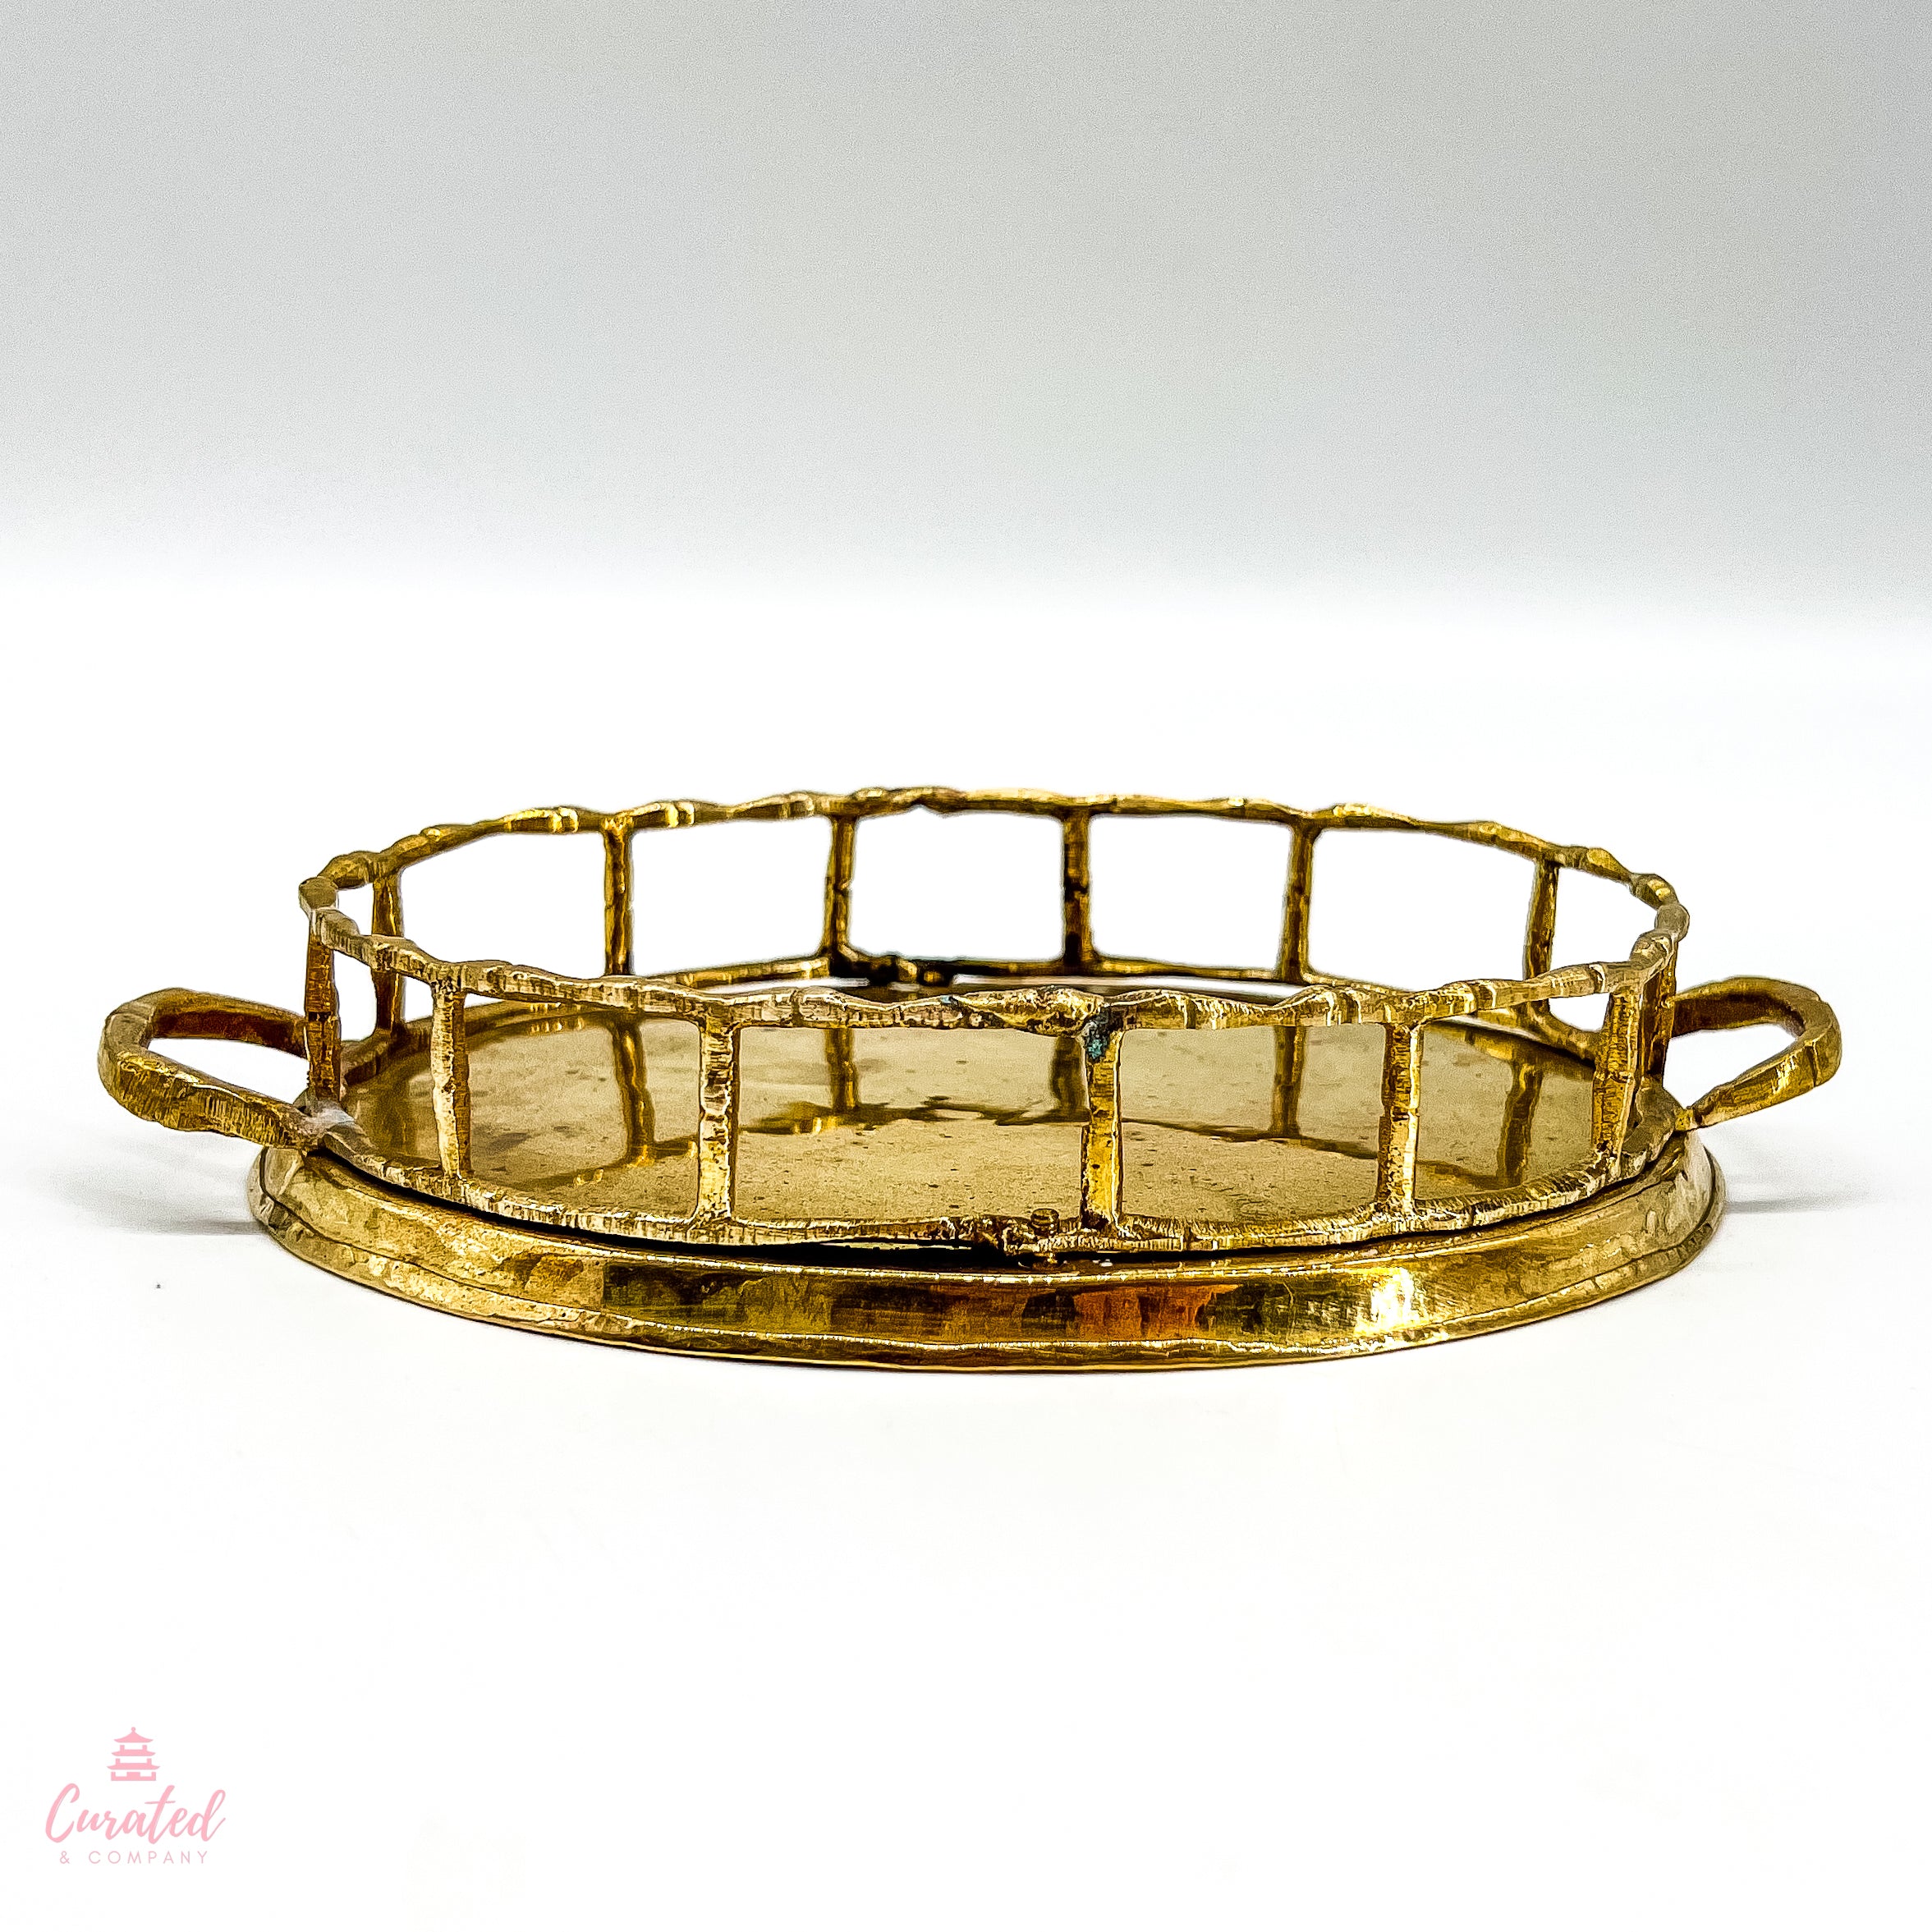 Brass Bamboo Tray – Social Graces Vintage